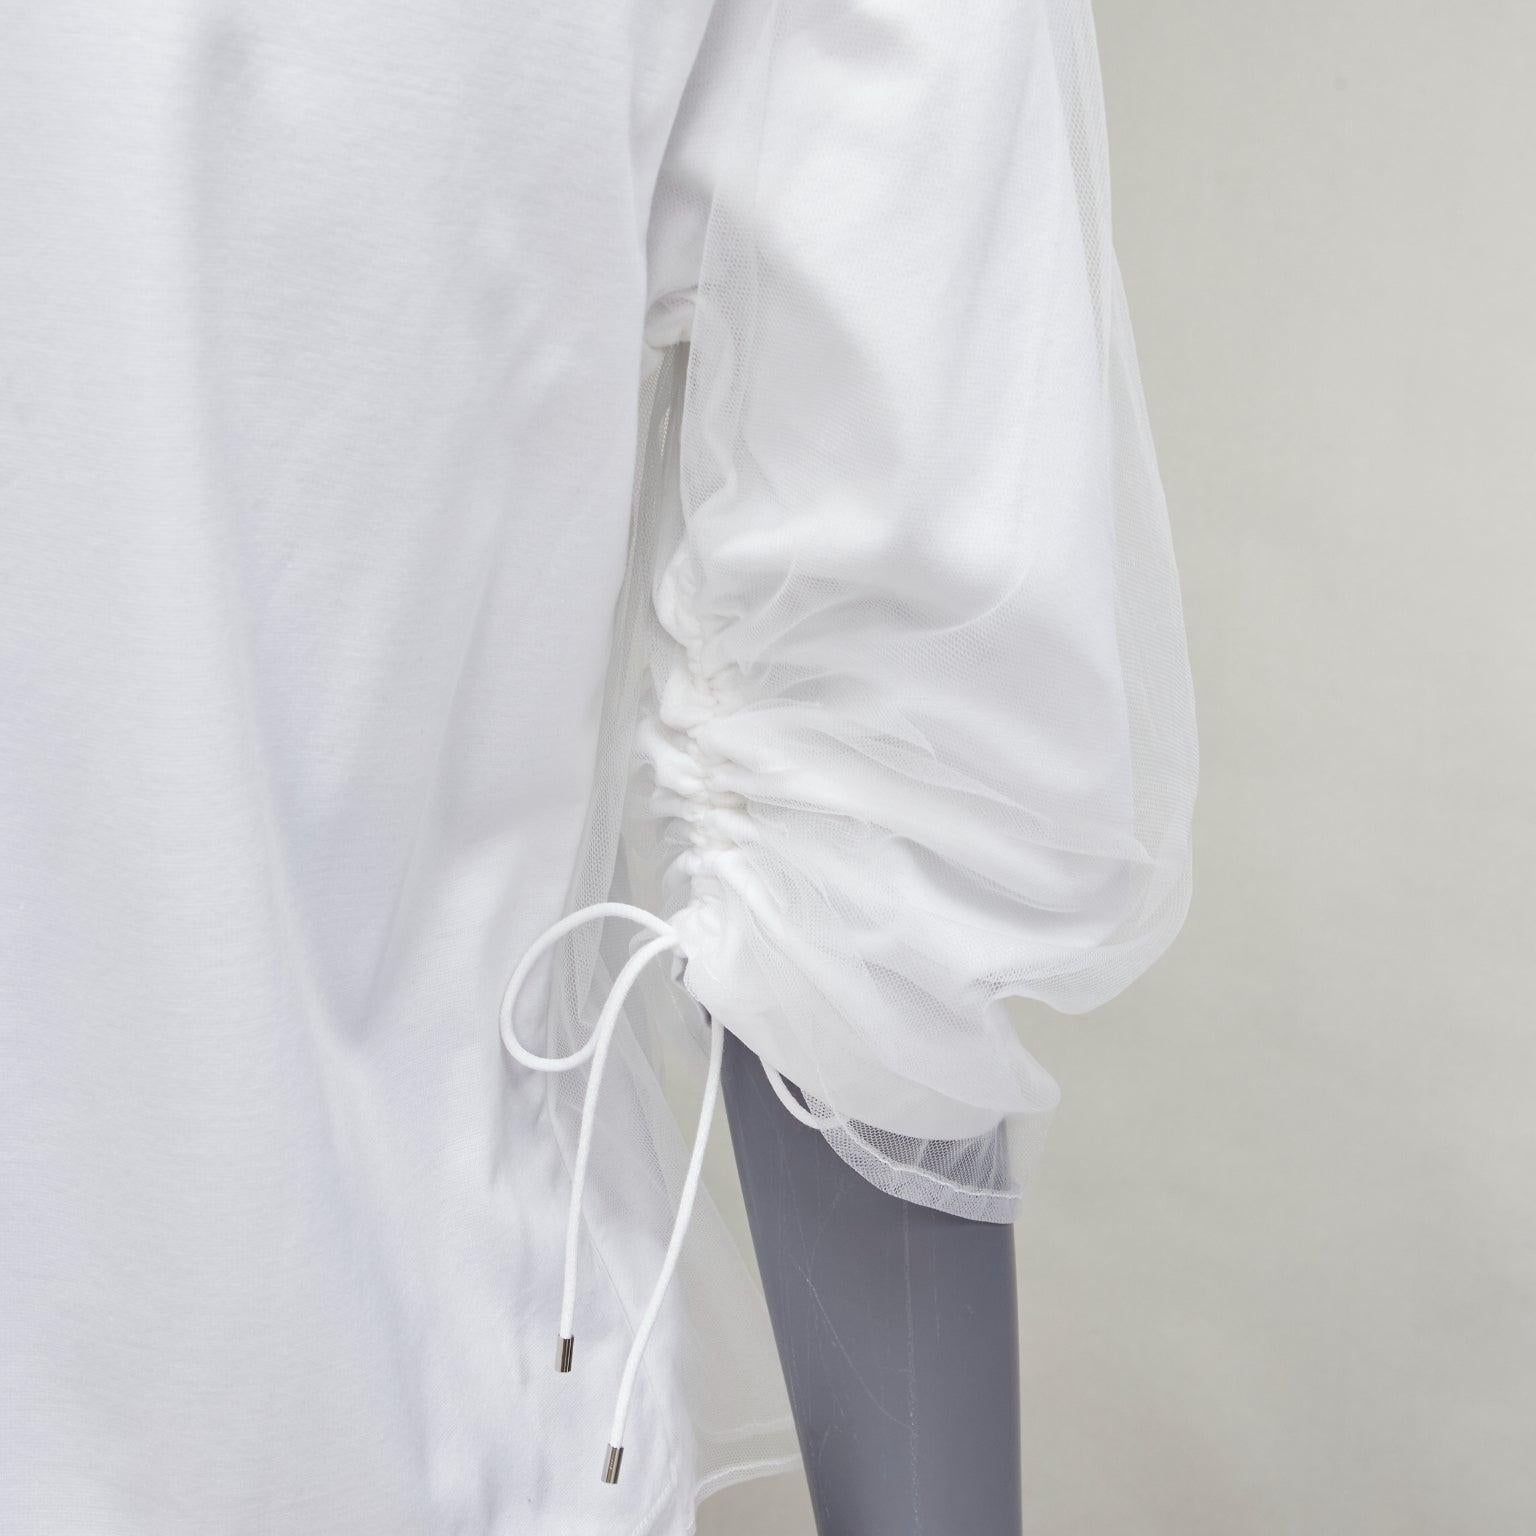 NOIR KEI NINOMIYA 2018 white cotton tulle overlay ruched sleeve tshirt XS
Reference: AAWC/A00753
Brand: Noir Kei Ninomiya
Collection: 2018
Material: Cotton
Color: White
Pattern: Solid
Closure: Pullover
Extra Details: Drawstring ruched details at